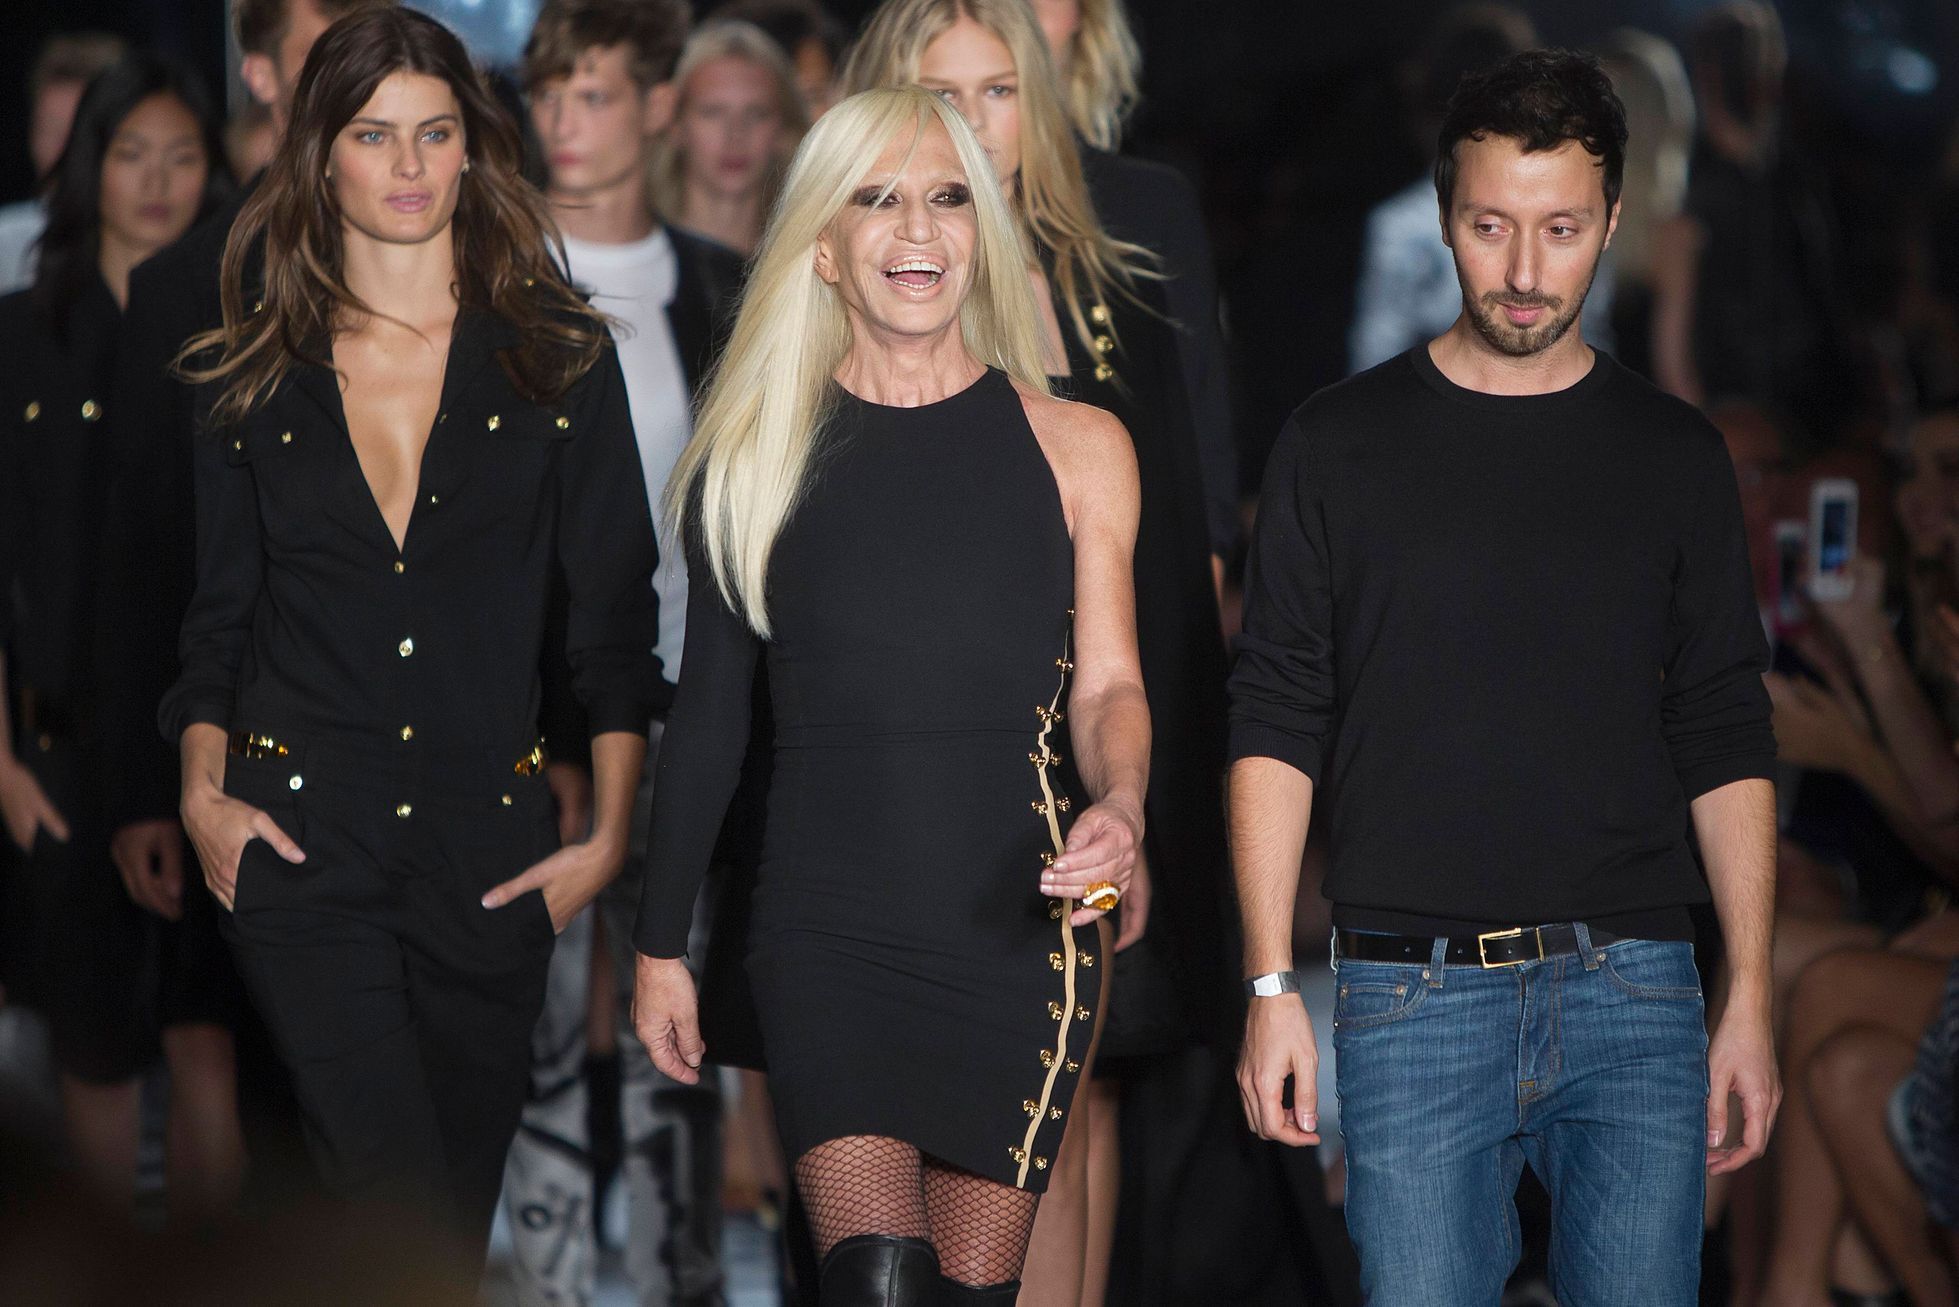 Designer Donatella Versace smiles on the runway after the Versus Versace Spring/Summer 2015 collection show during New York Fashion Week